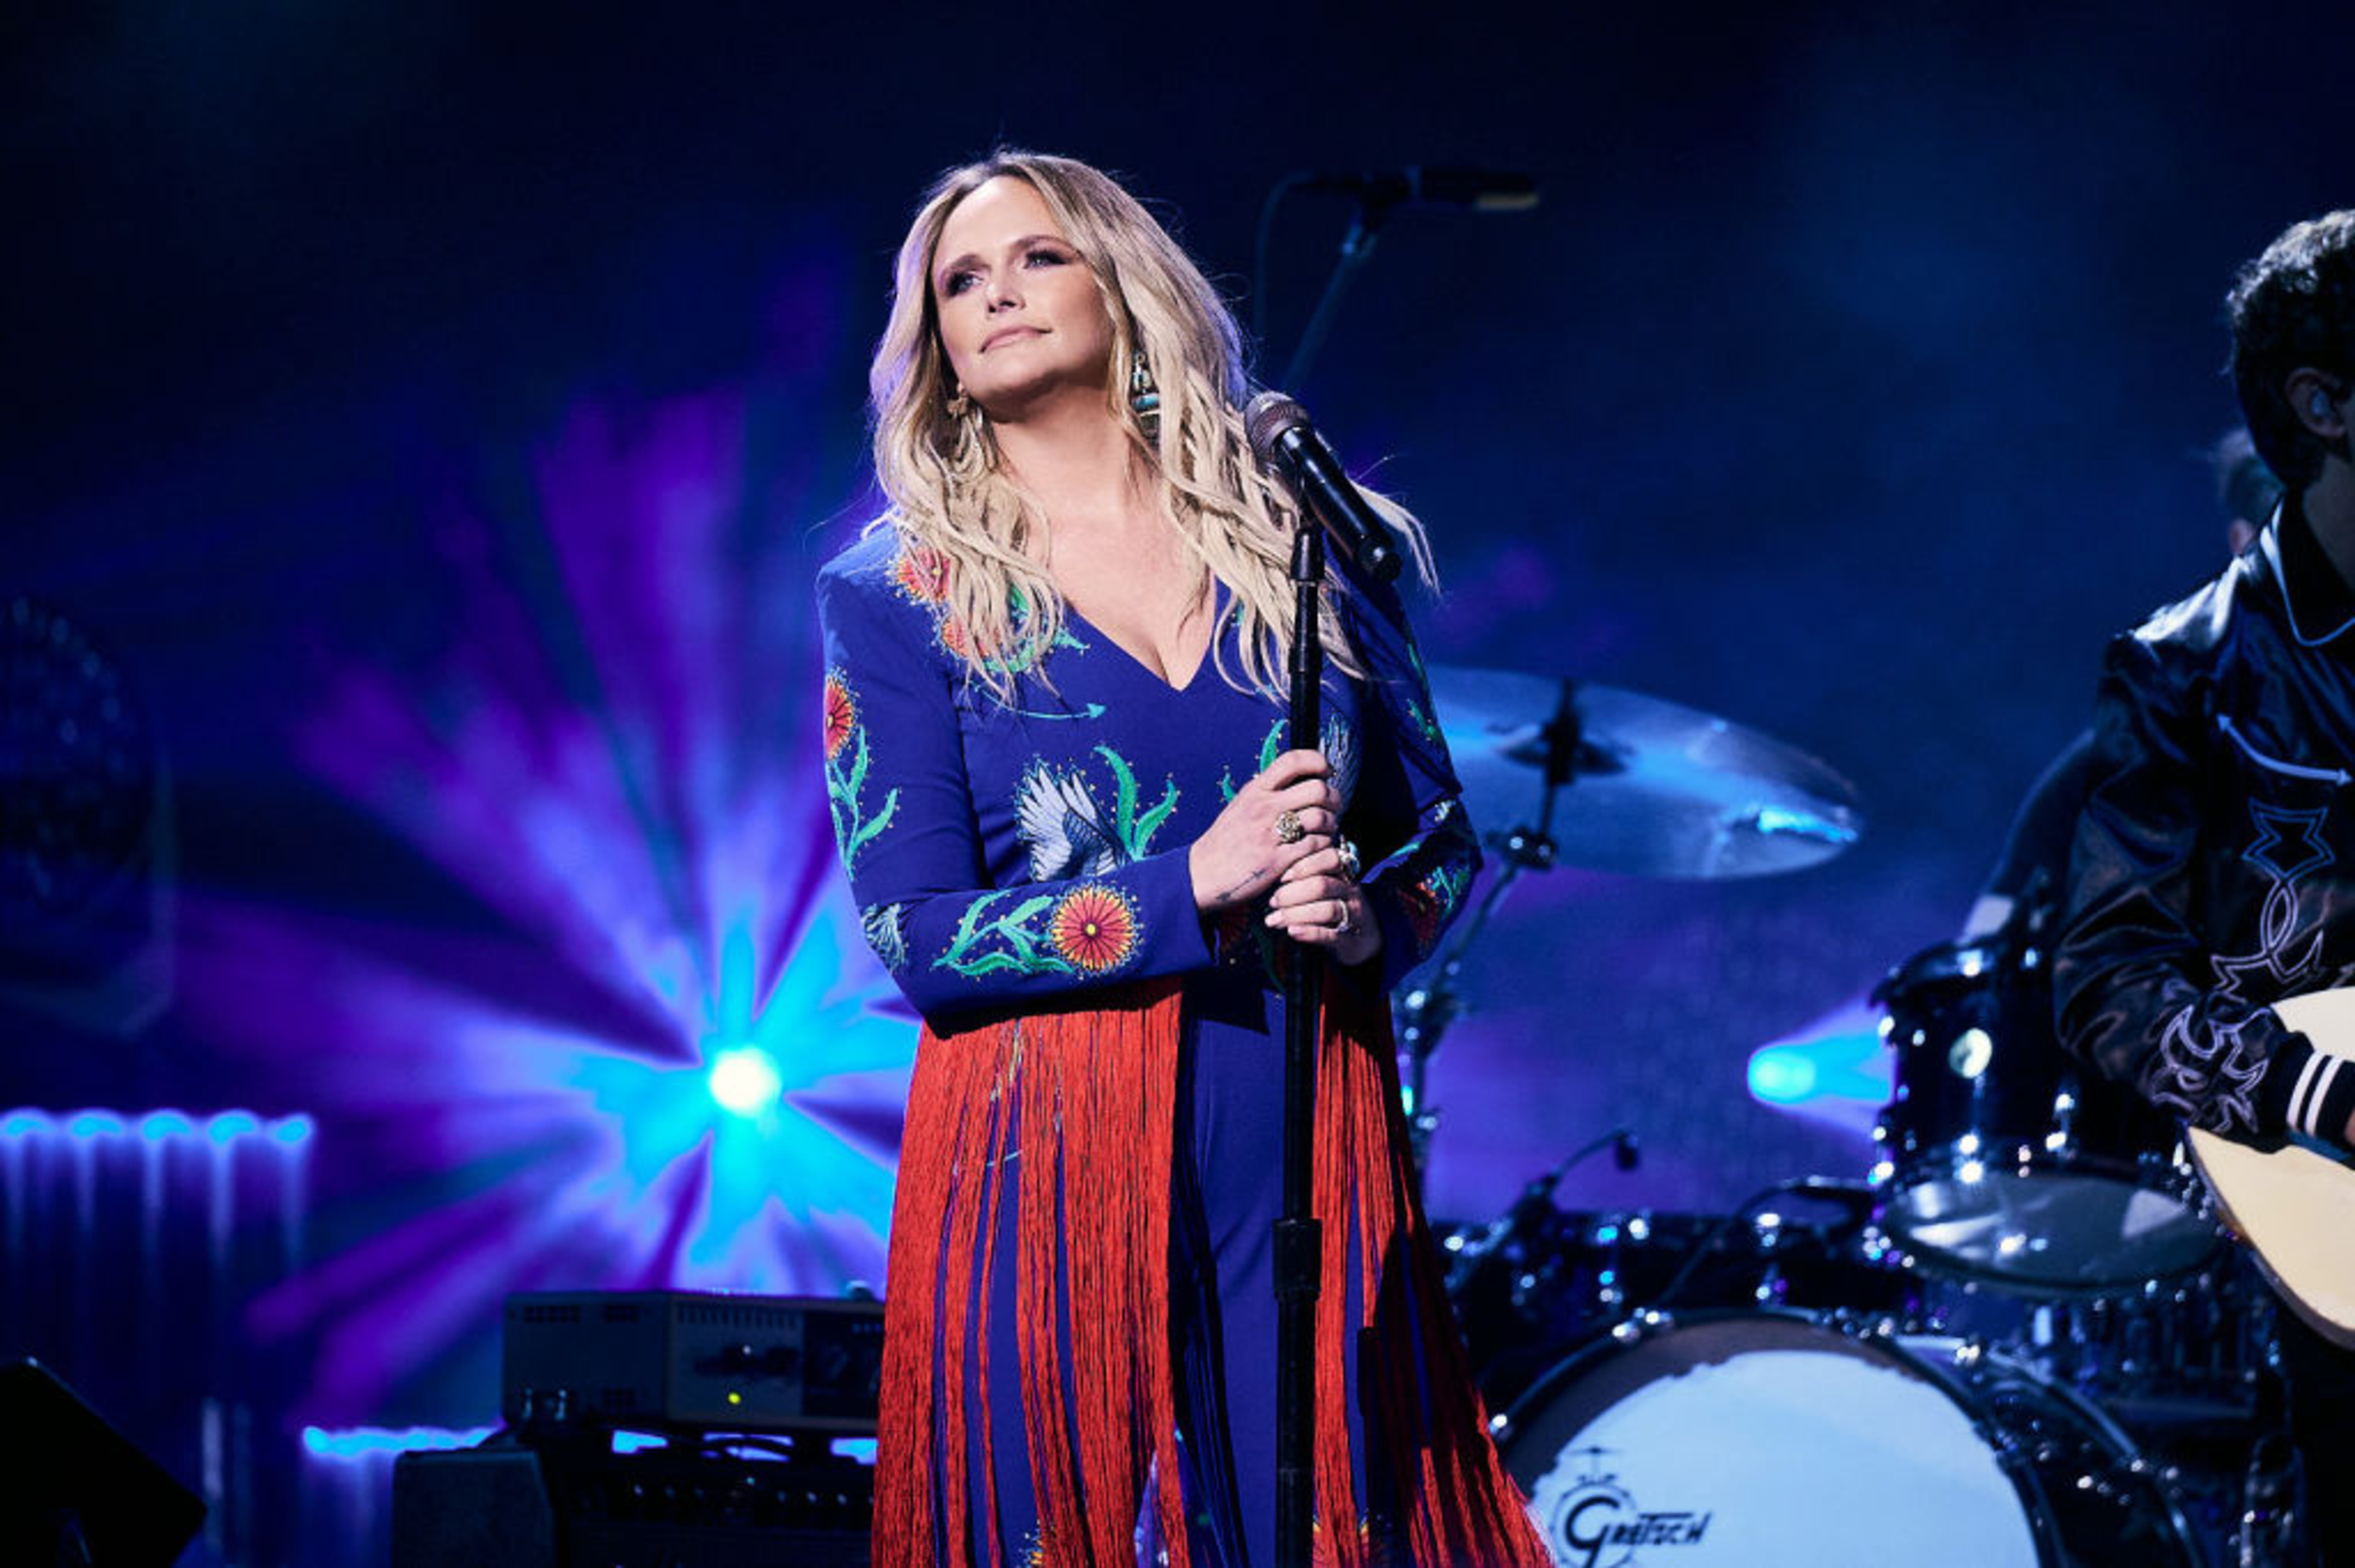 <p>Miranda Lambert's 2020 ballad "Settling Down" is essential for anyone who, like Lambert sings in this song, has their "feet on the ground and head up in the clouds." </p><p>You may also like: <a href='https://www.yardbarker.com/entertainment/articles/underrated_albums_from_legendary_bands_09123/s1__35171126'>Underrated albums from legendary bands</a></p>